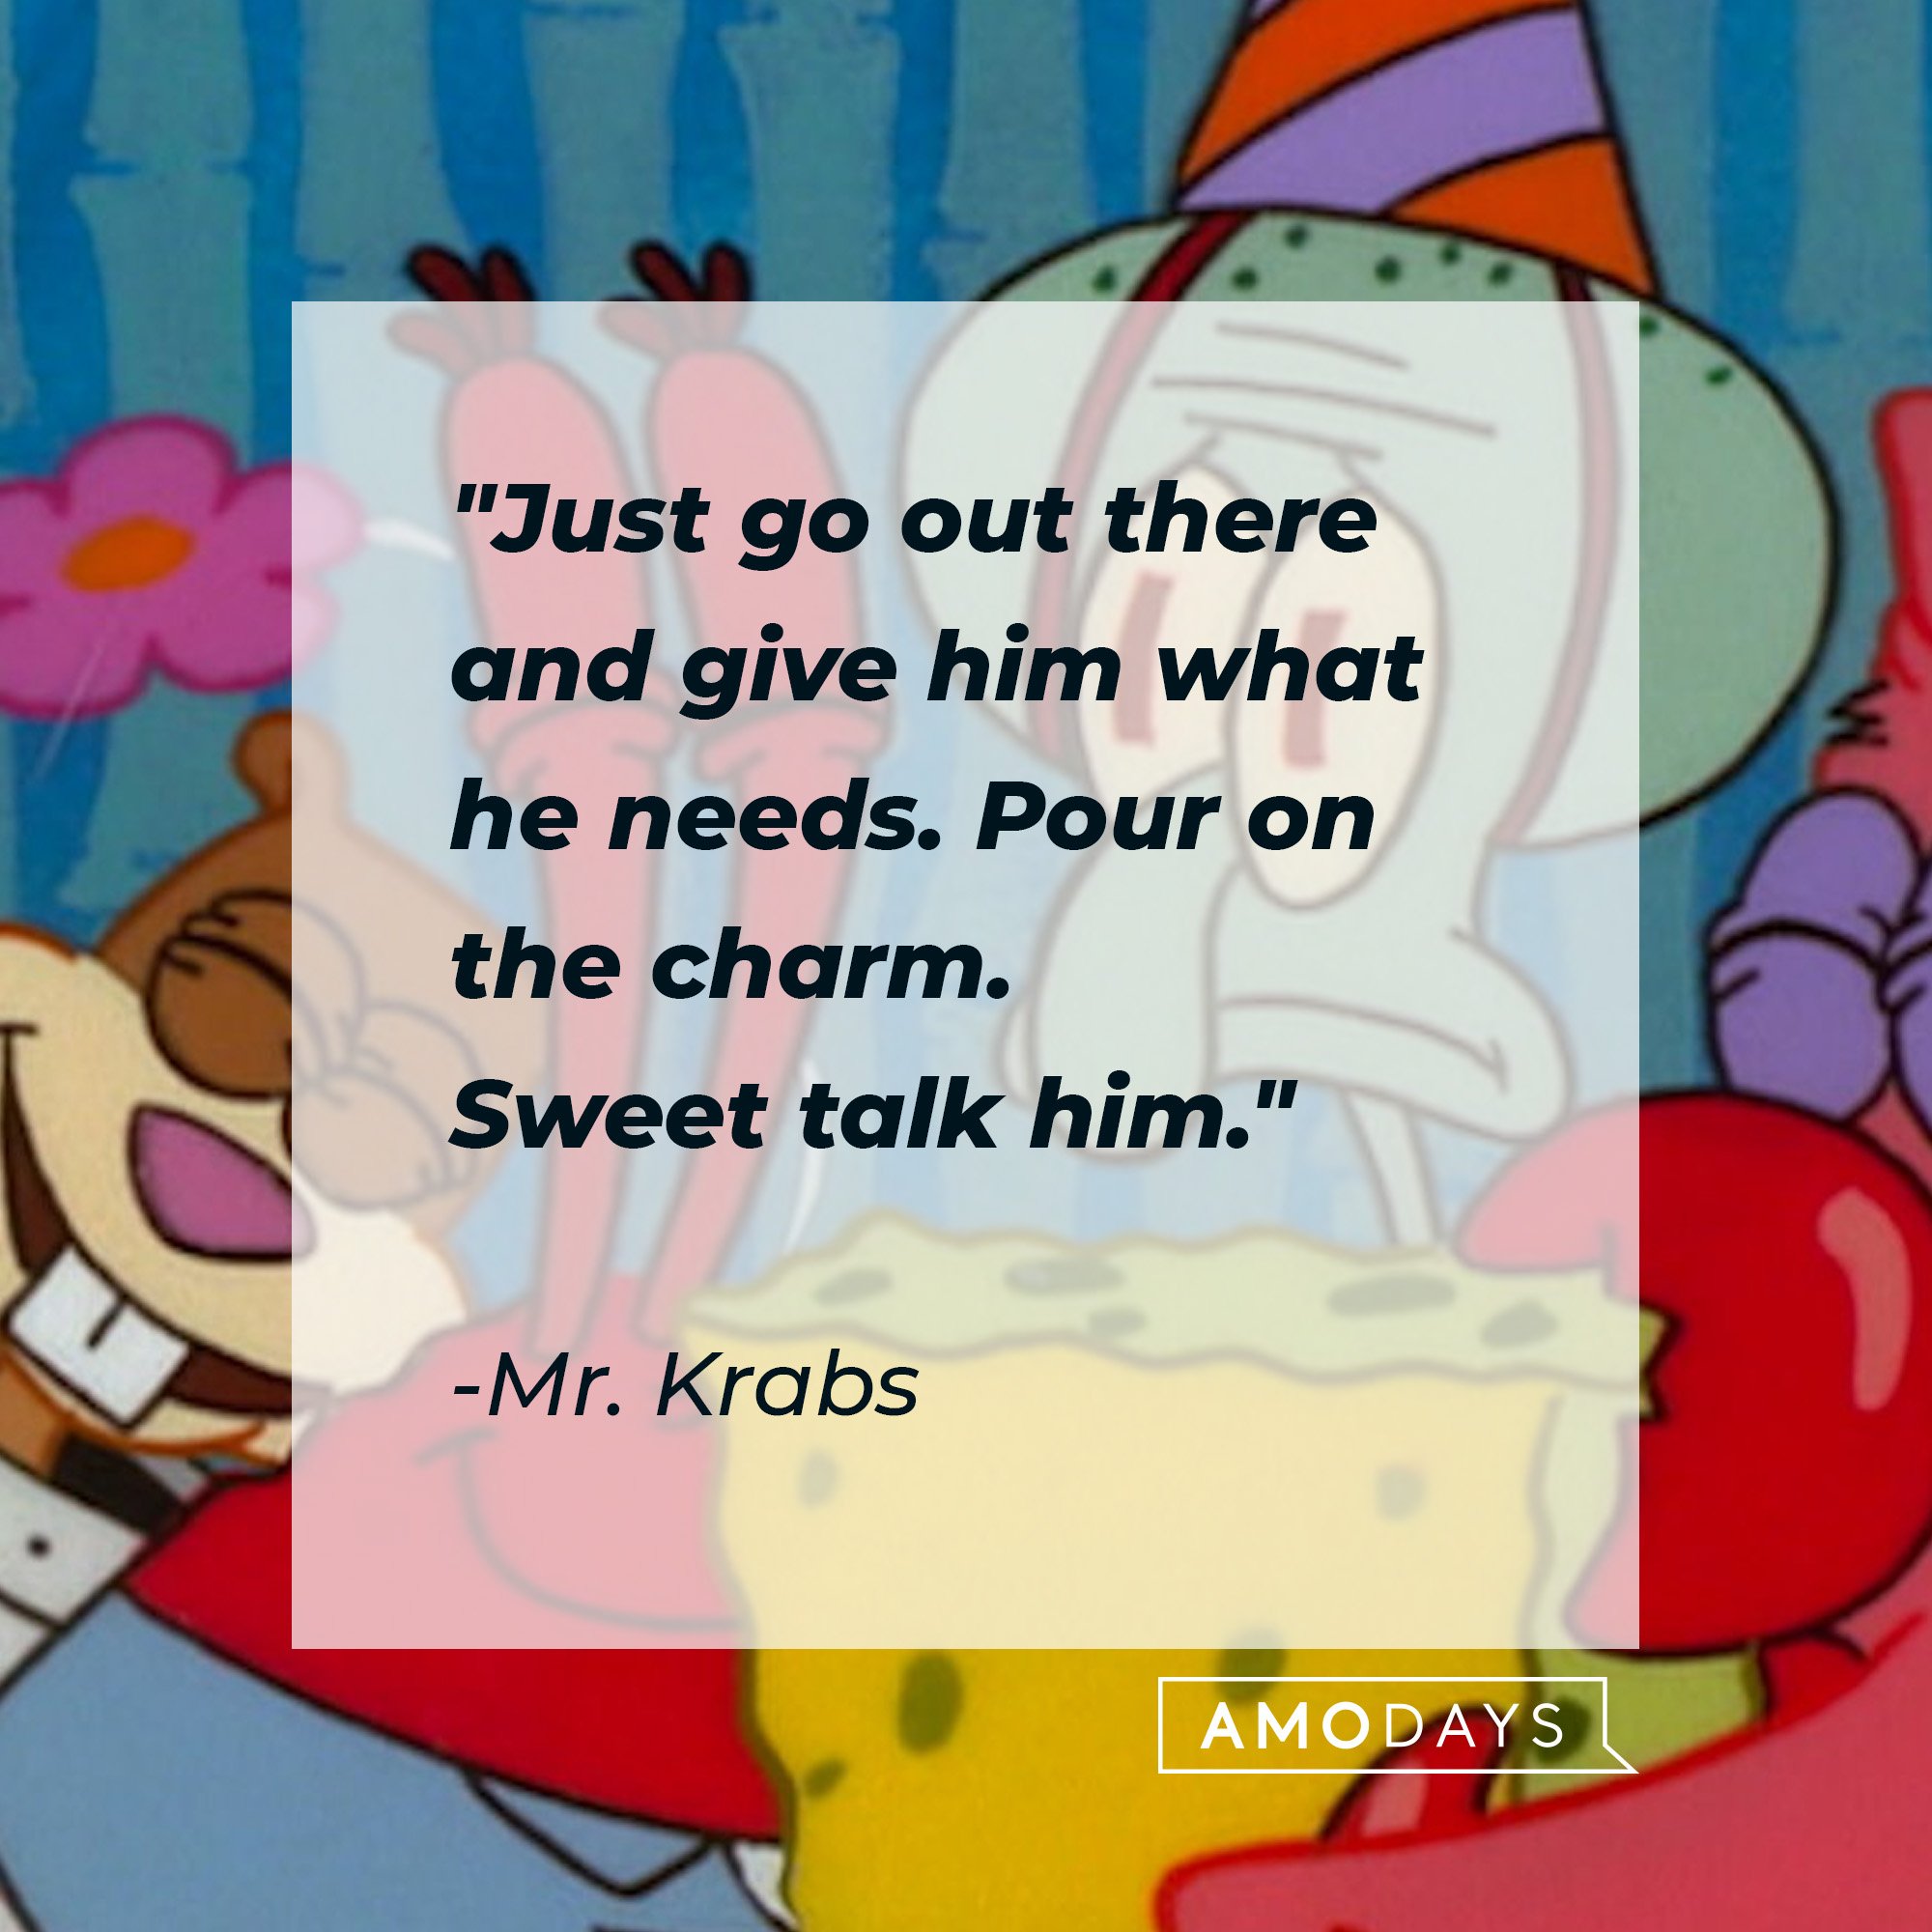 Mr. Krabs's quote: "Just go out there and give him what he needs. Pour on the charm. Sweet talk him." | Image: AmoDays 